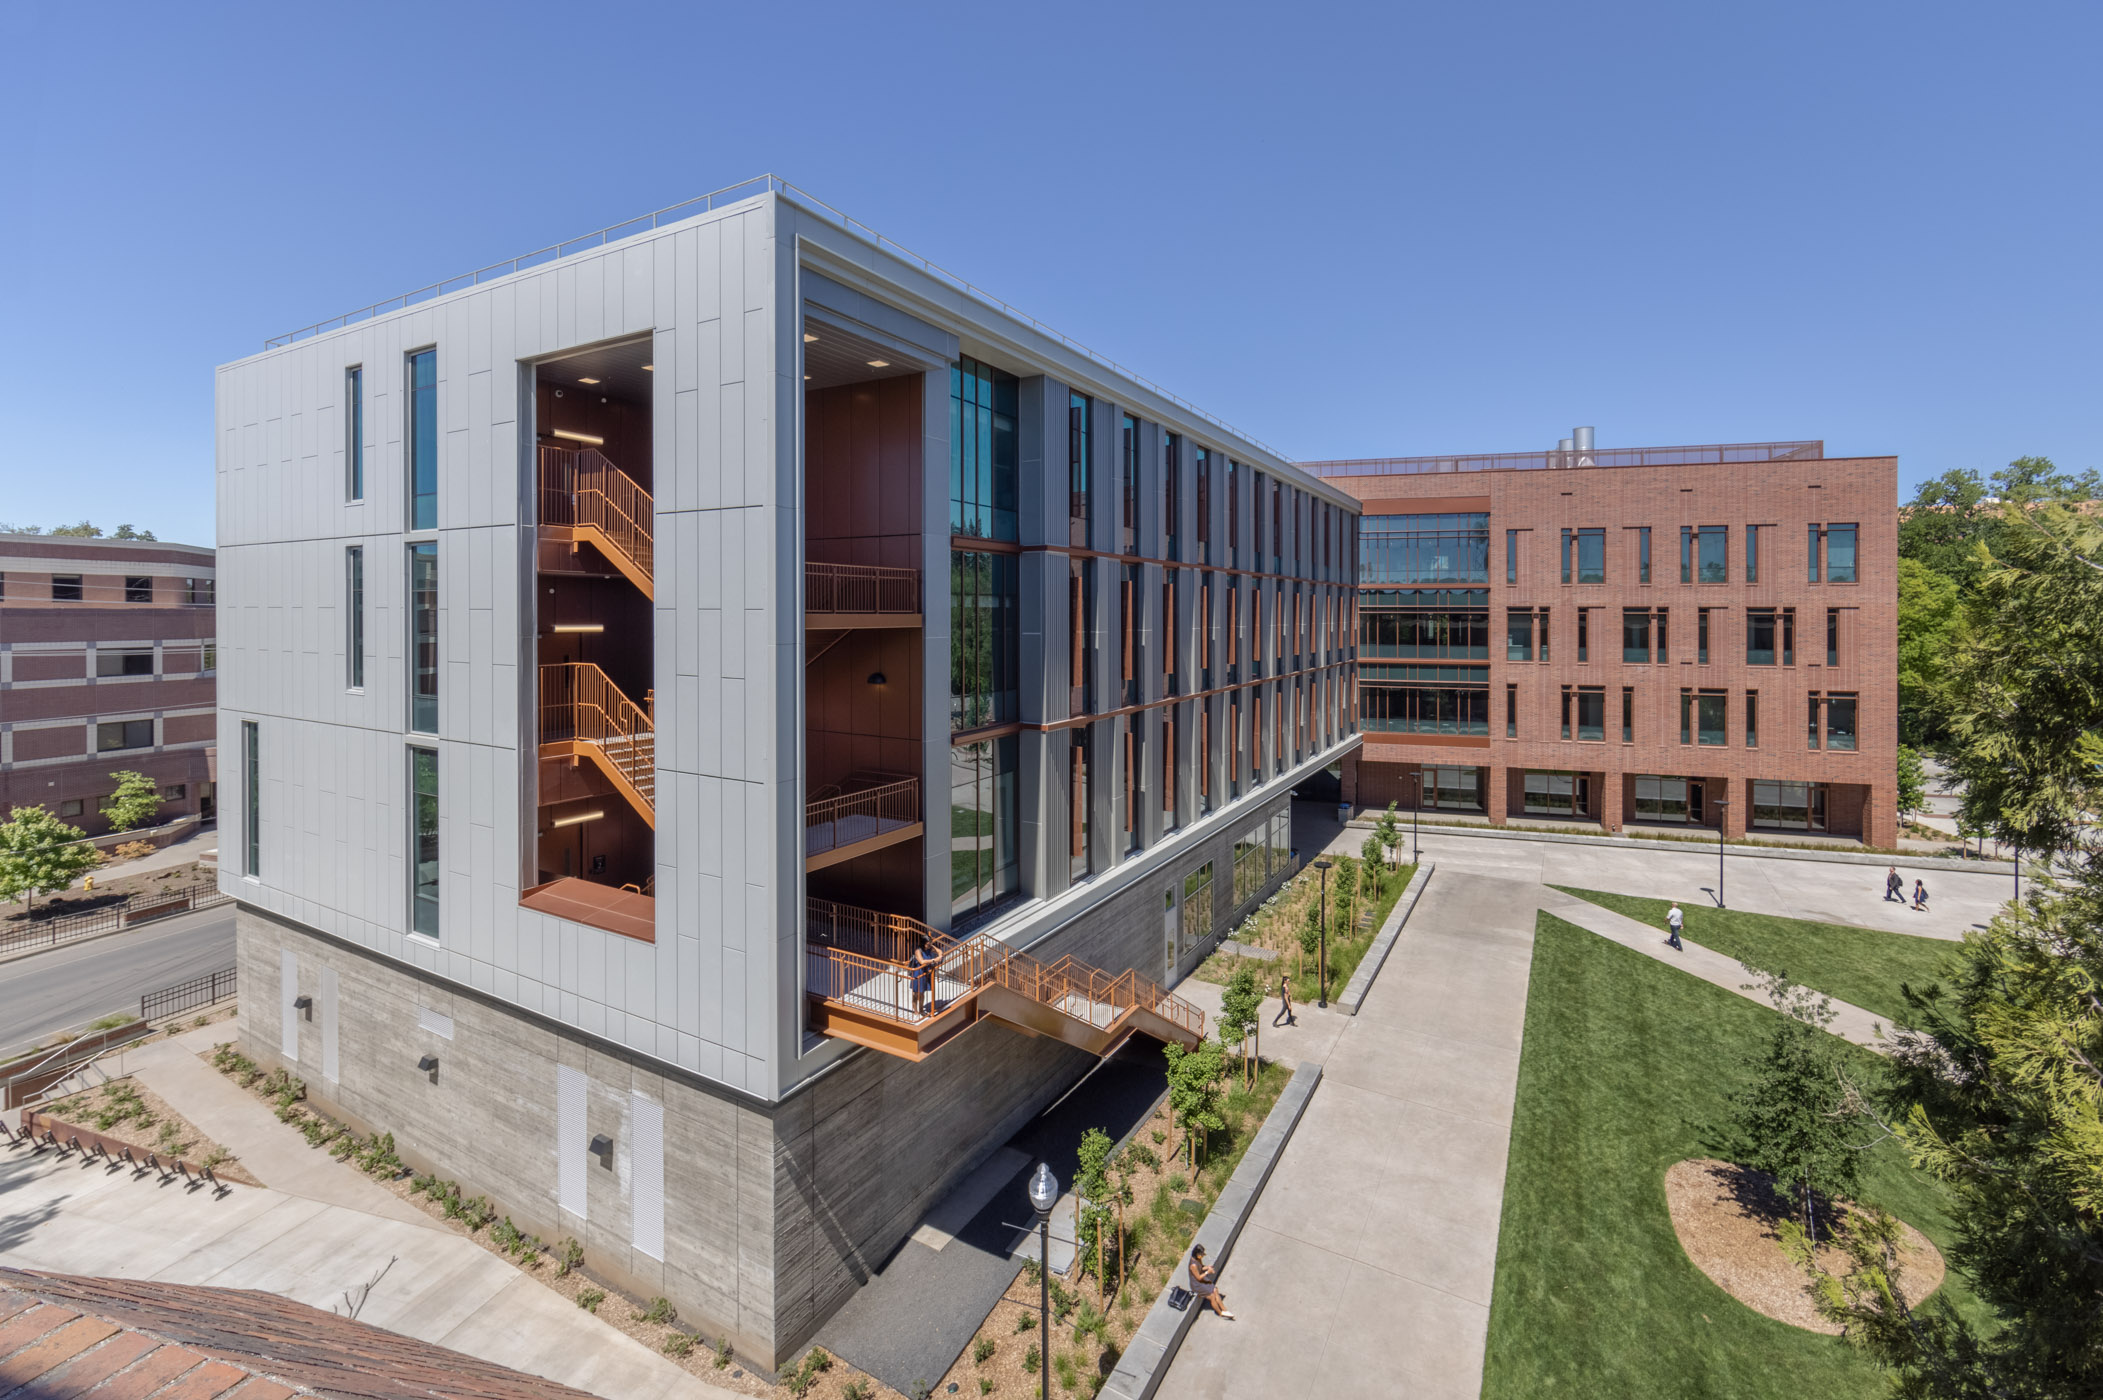 4-21_Smithgroup_ChicoState-5050-Edit_InstitutionsGallery